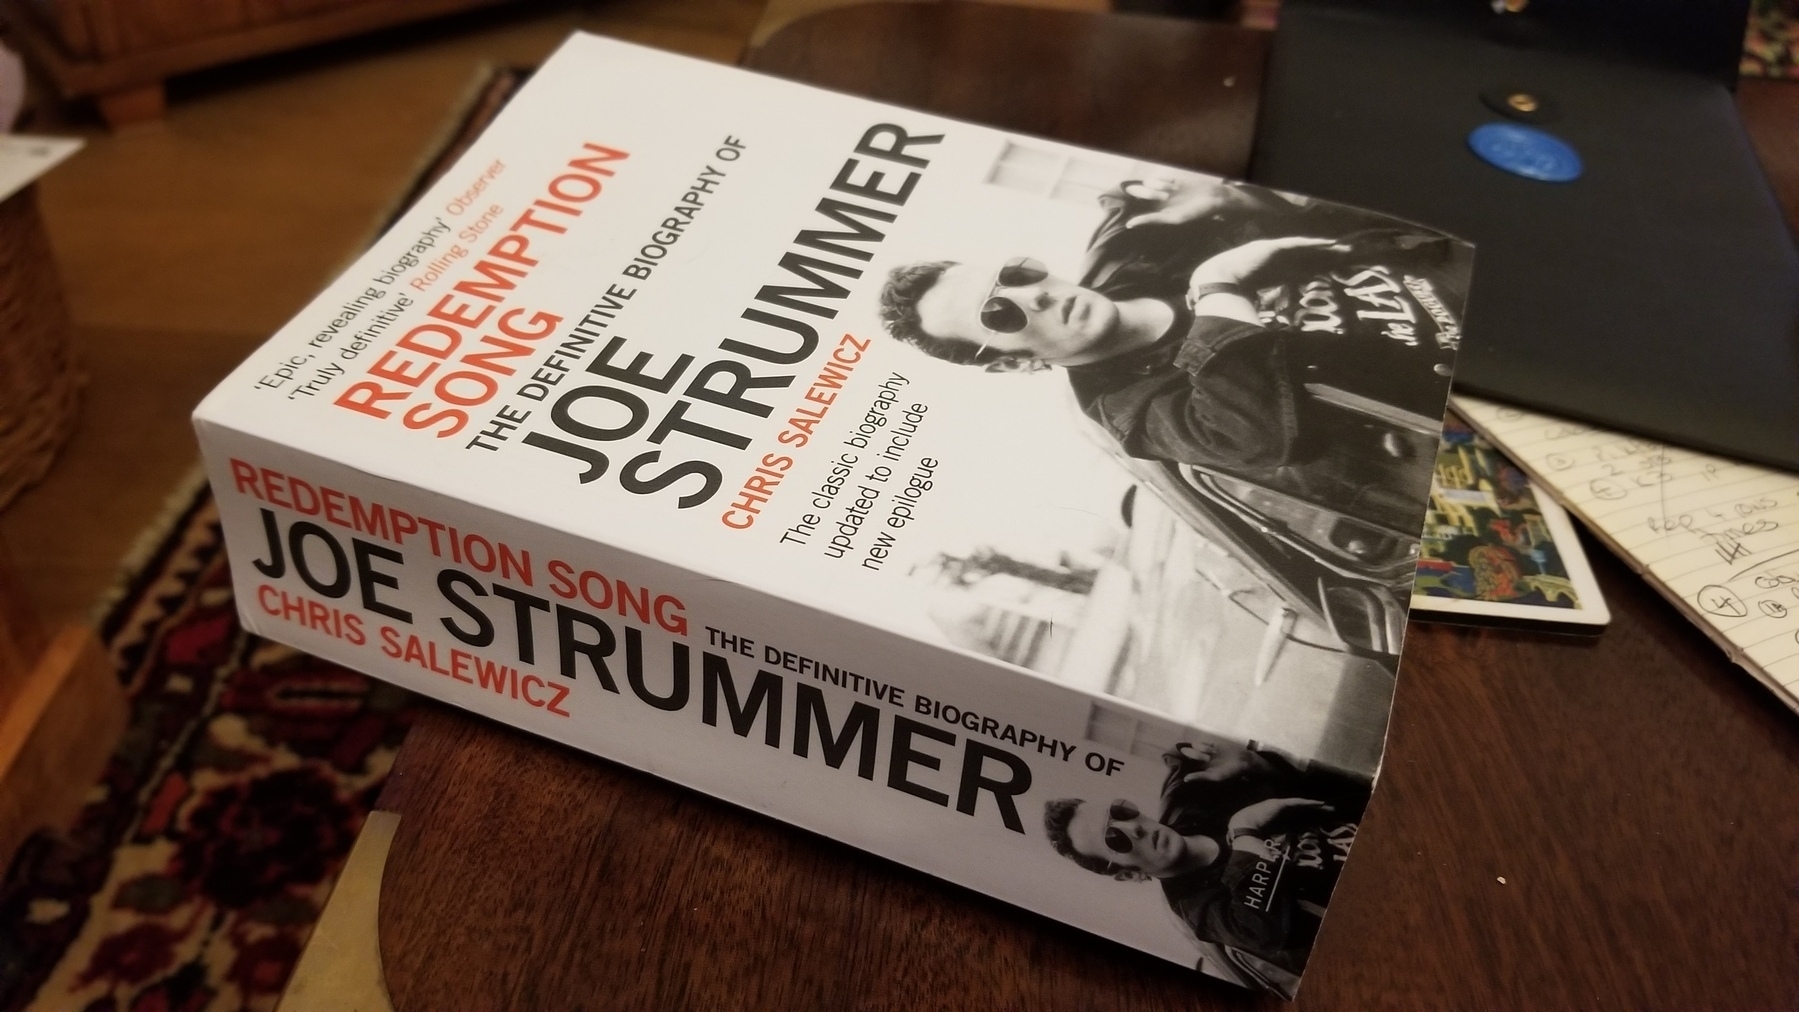 A paperback copy of Redemption Song: the Definitive Biography of Joe Strummer, by Chris Salewicz, lying on a coffee table.